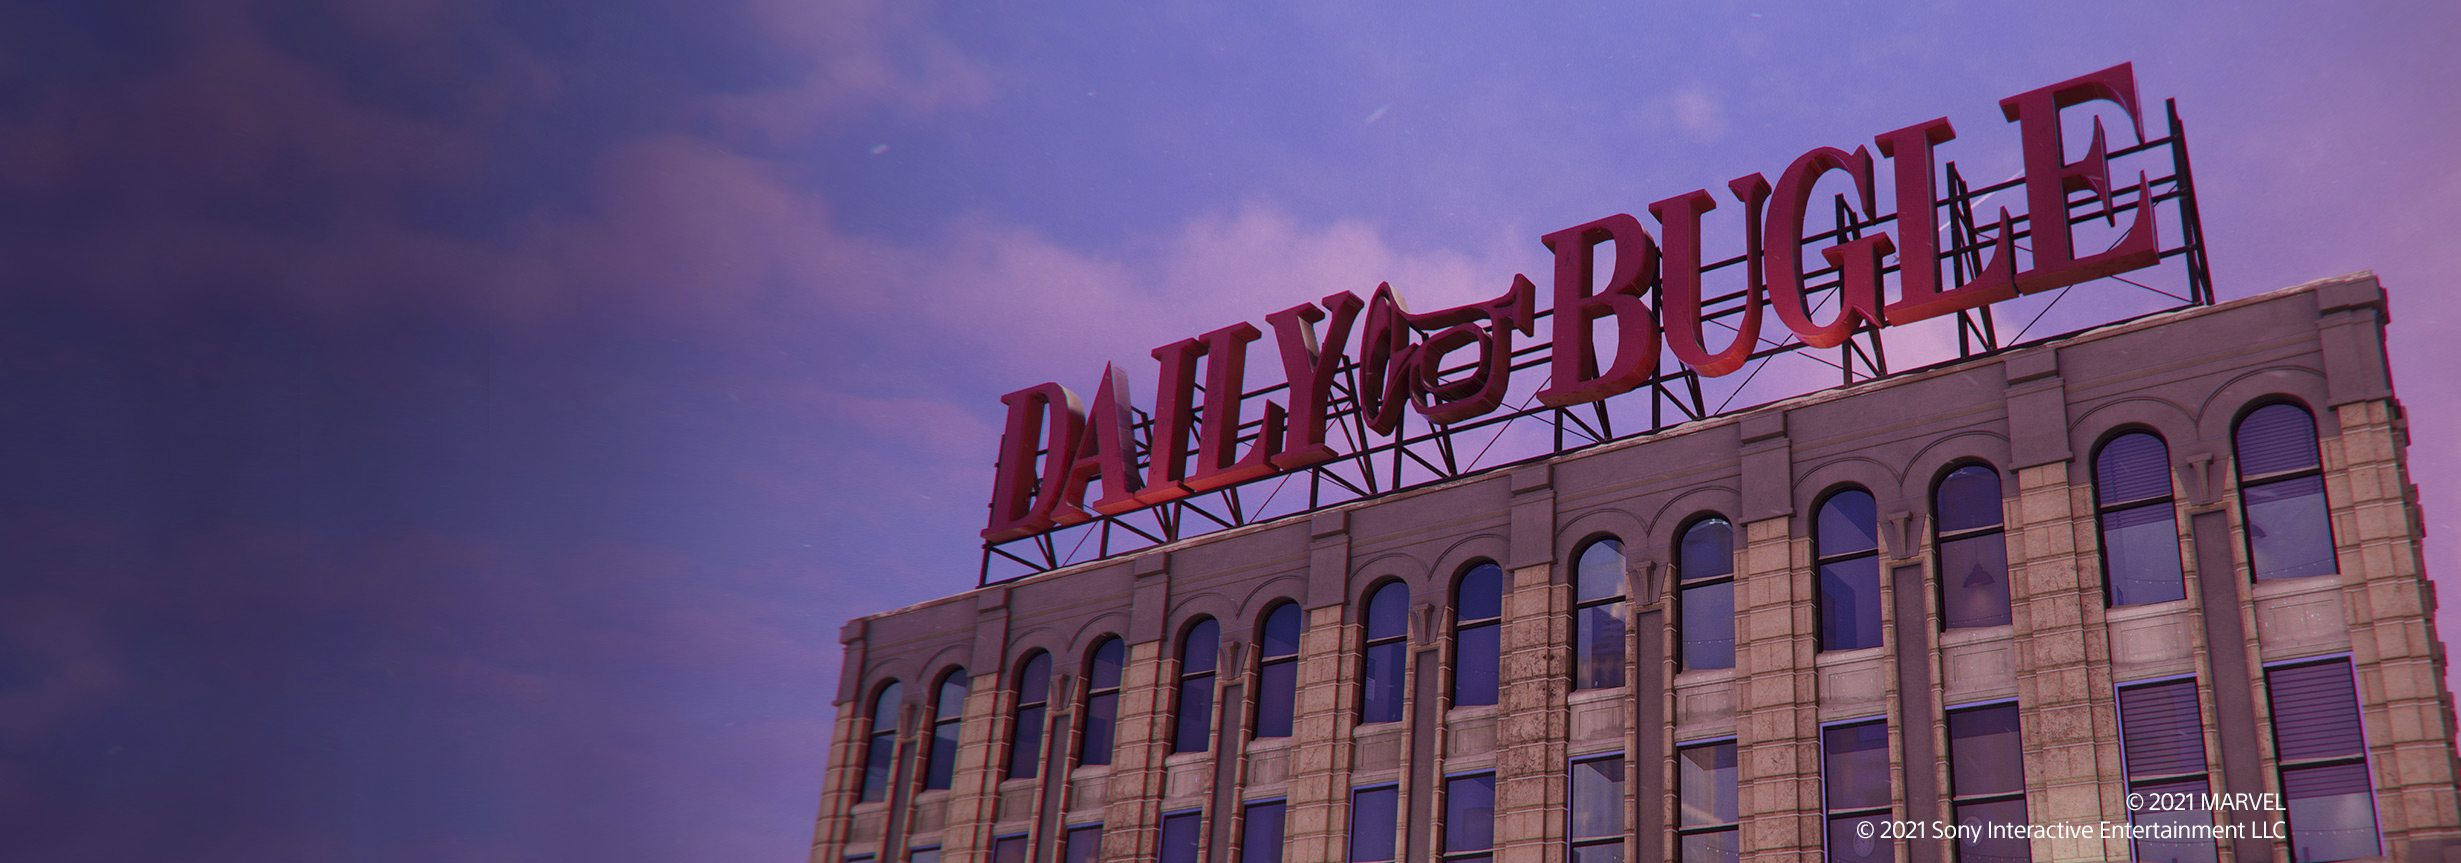 Daily Bugle Now – banner